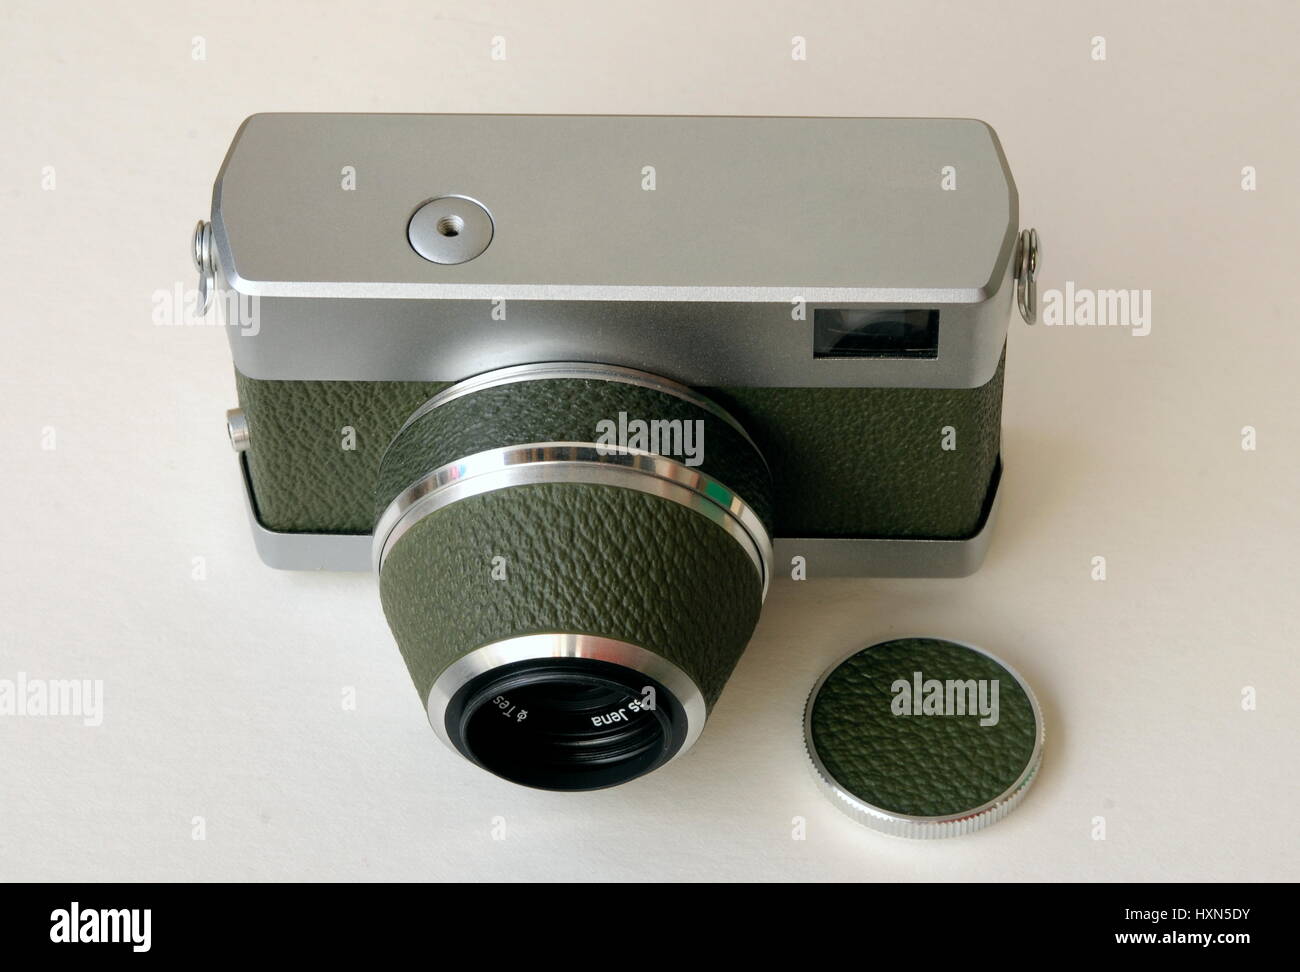 AJAXNETPHOTO. UNITED KINGDOM. - EAST GERMAN CAMERA - ORIGINAL WERRA 1 35MM FORMAT ANALOG FILM CAMERA WITH OLIVE GREEN LEATHERETTE COVERING MADE BY CARL ZEISS JENA SHOWN HERE WITH PROTECTIVE LENS BARREL COVER FITTED AND LENS CAP. PHOTO:JONATHAN EASTLAND/AJAX REF:D122405 2400 Stock Photo